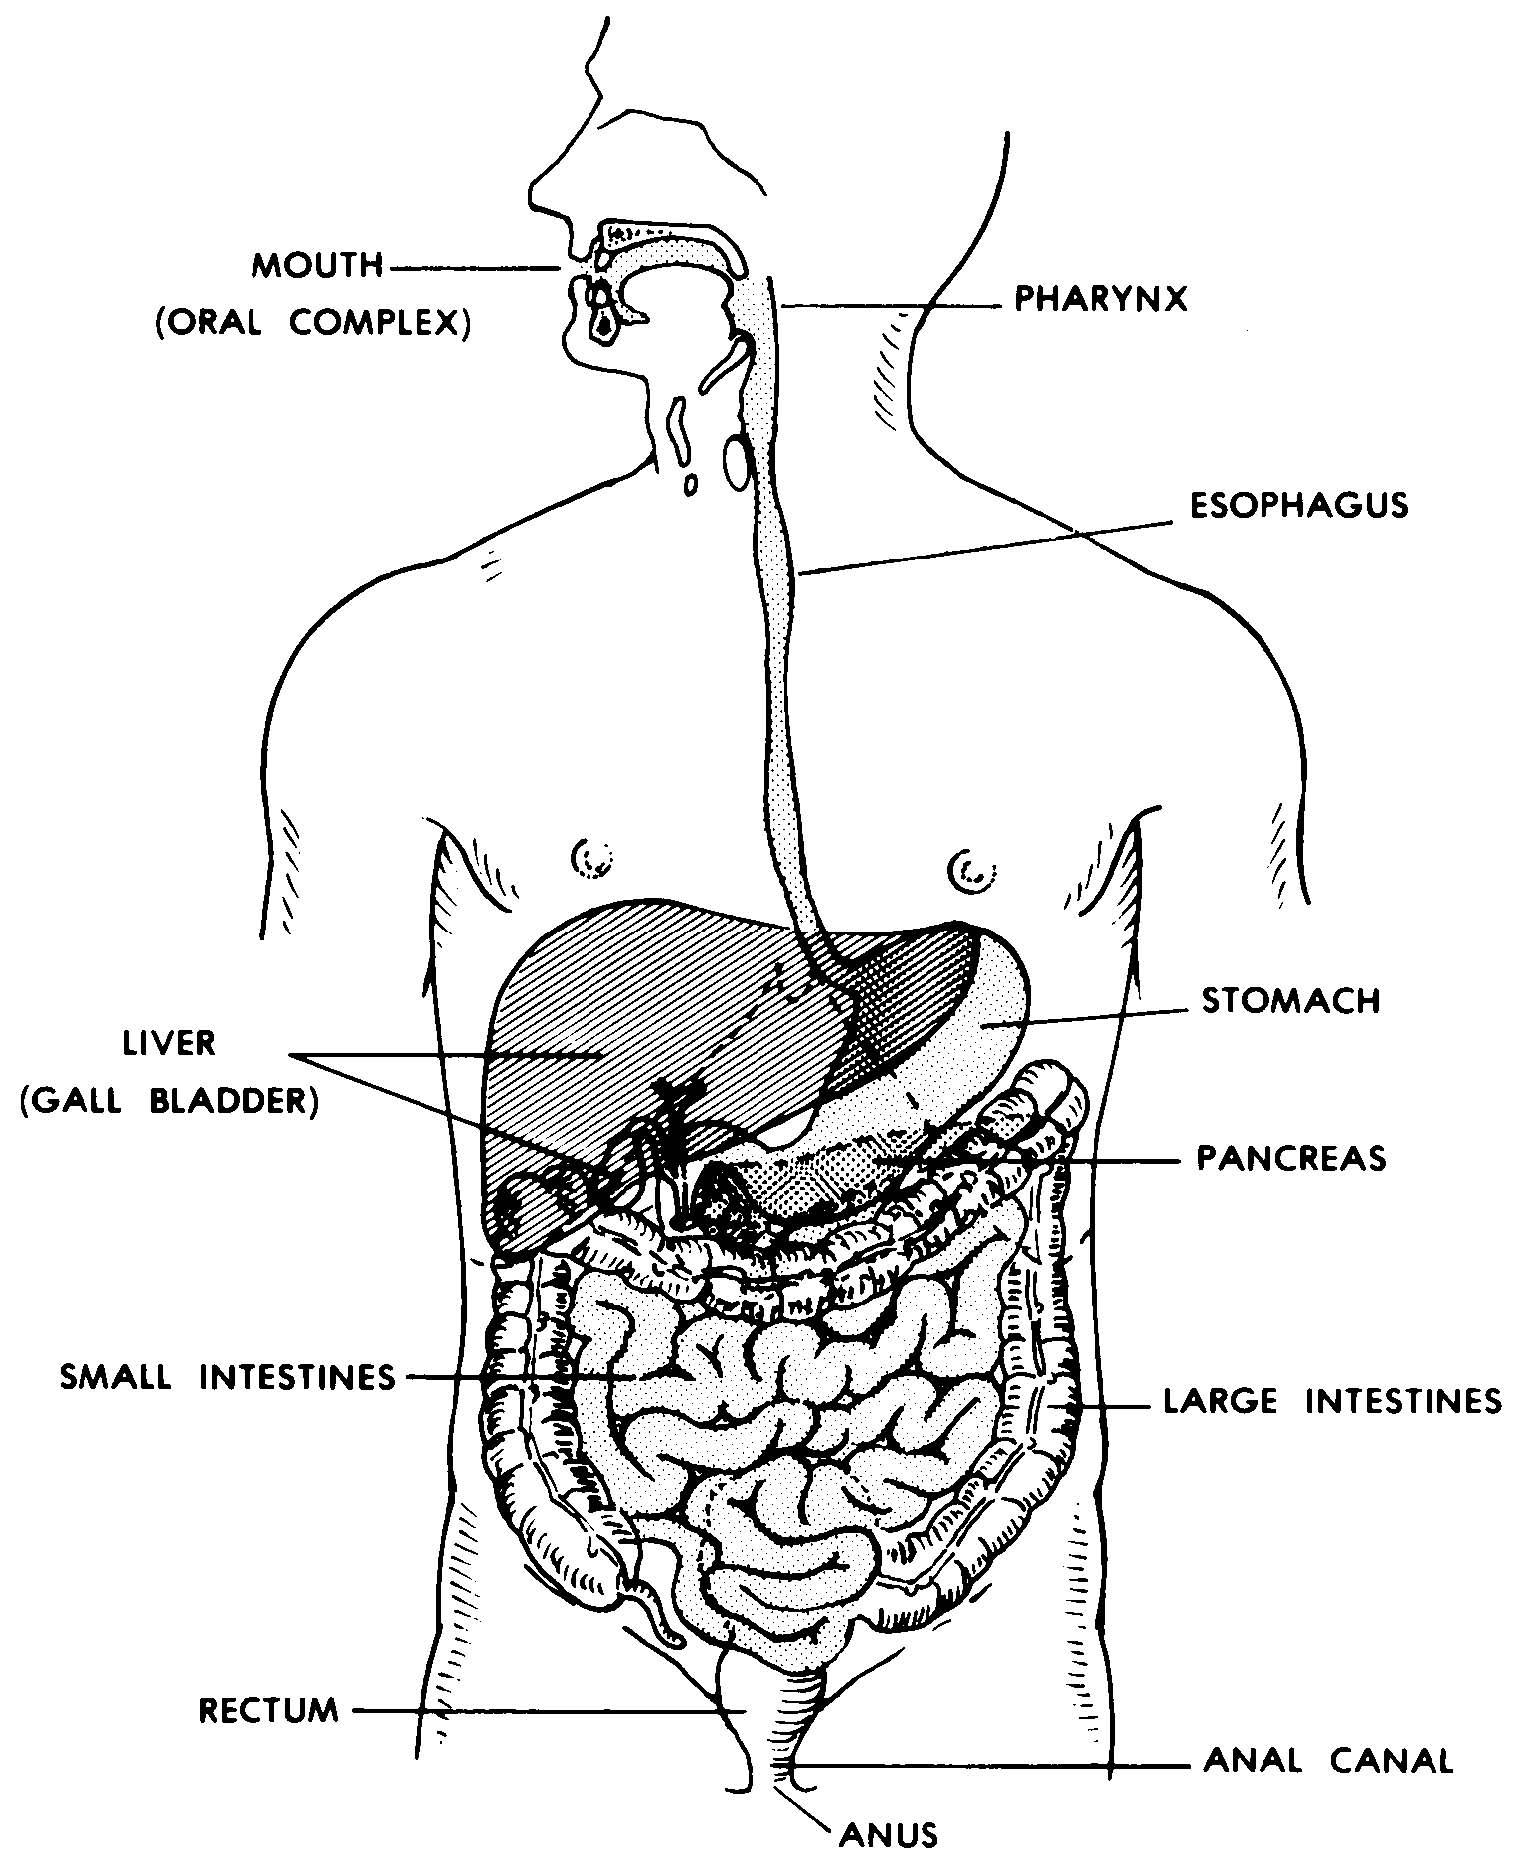 assignment 5.2 digestive system anatomy